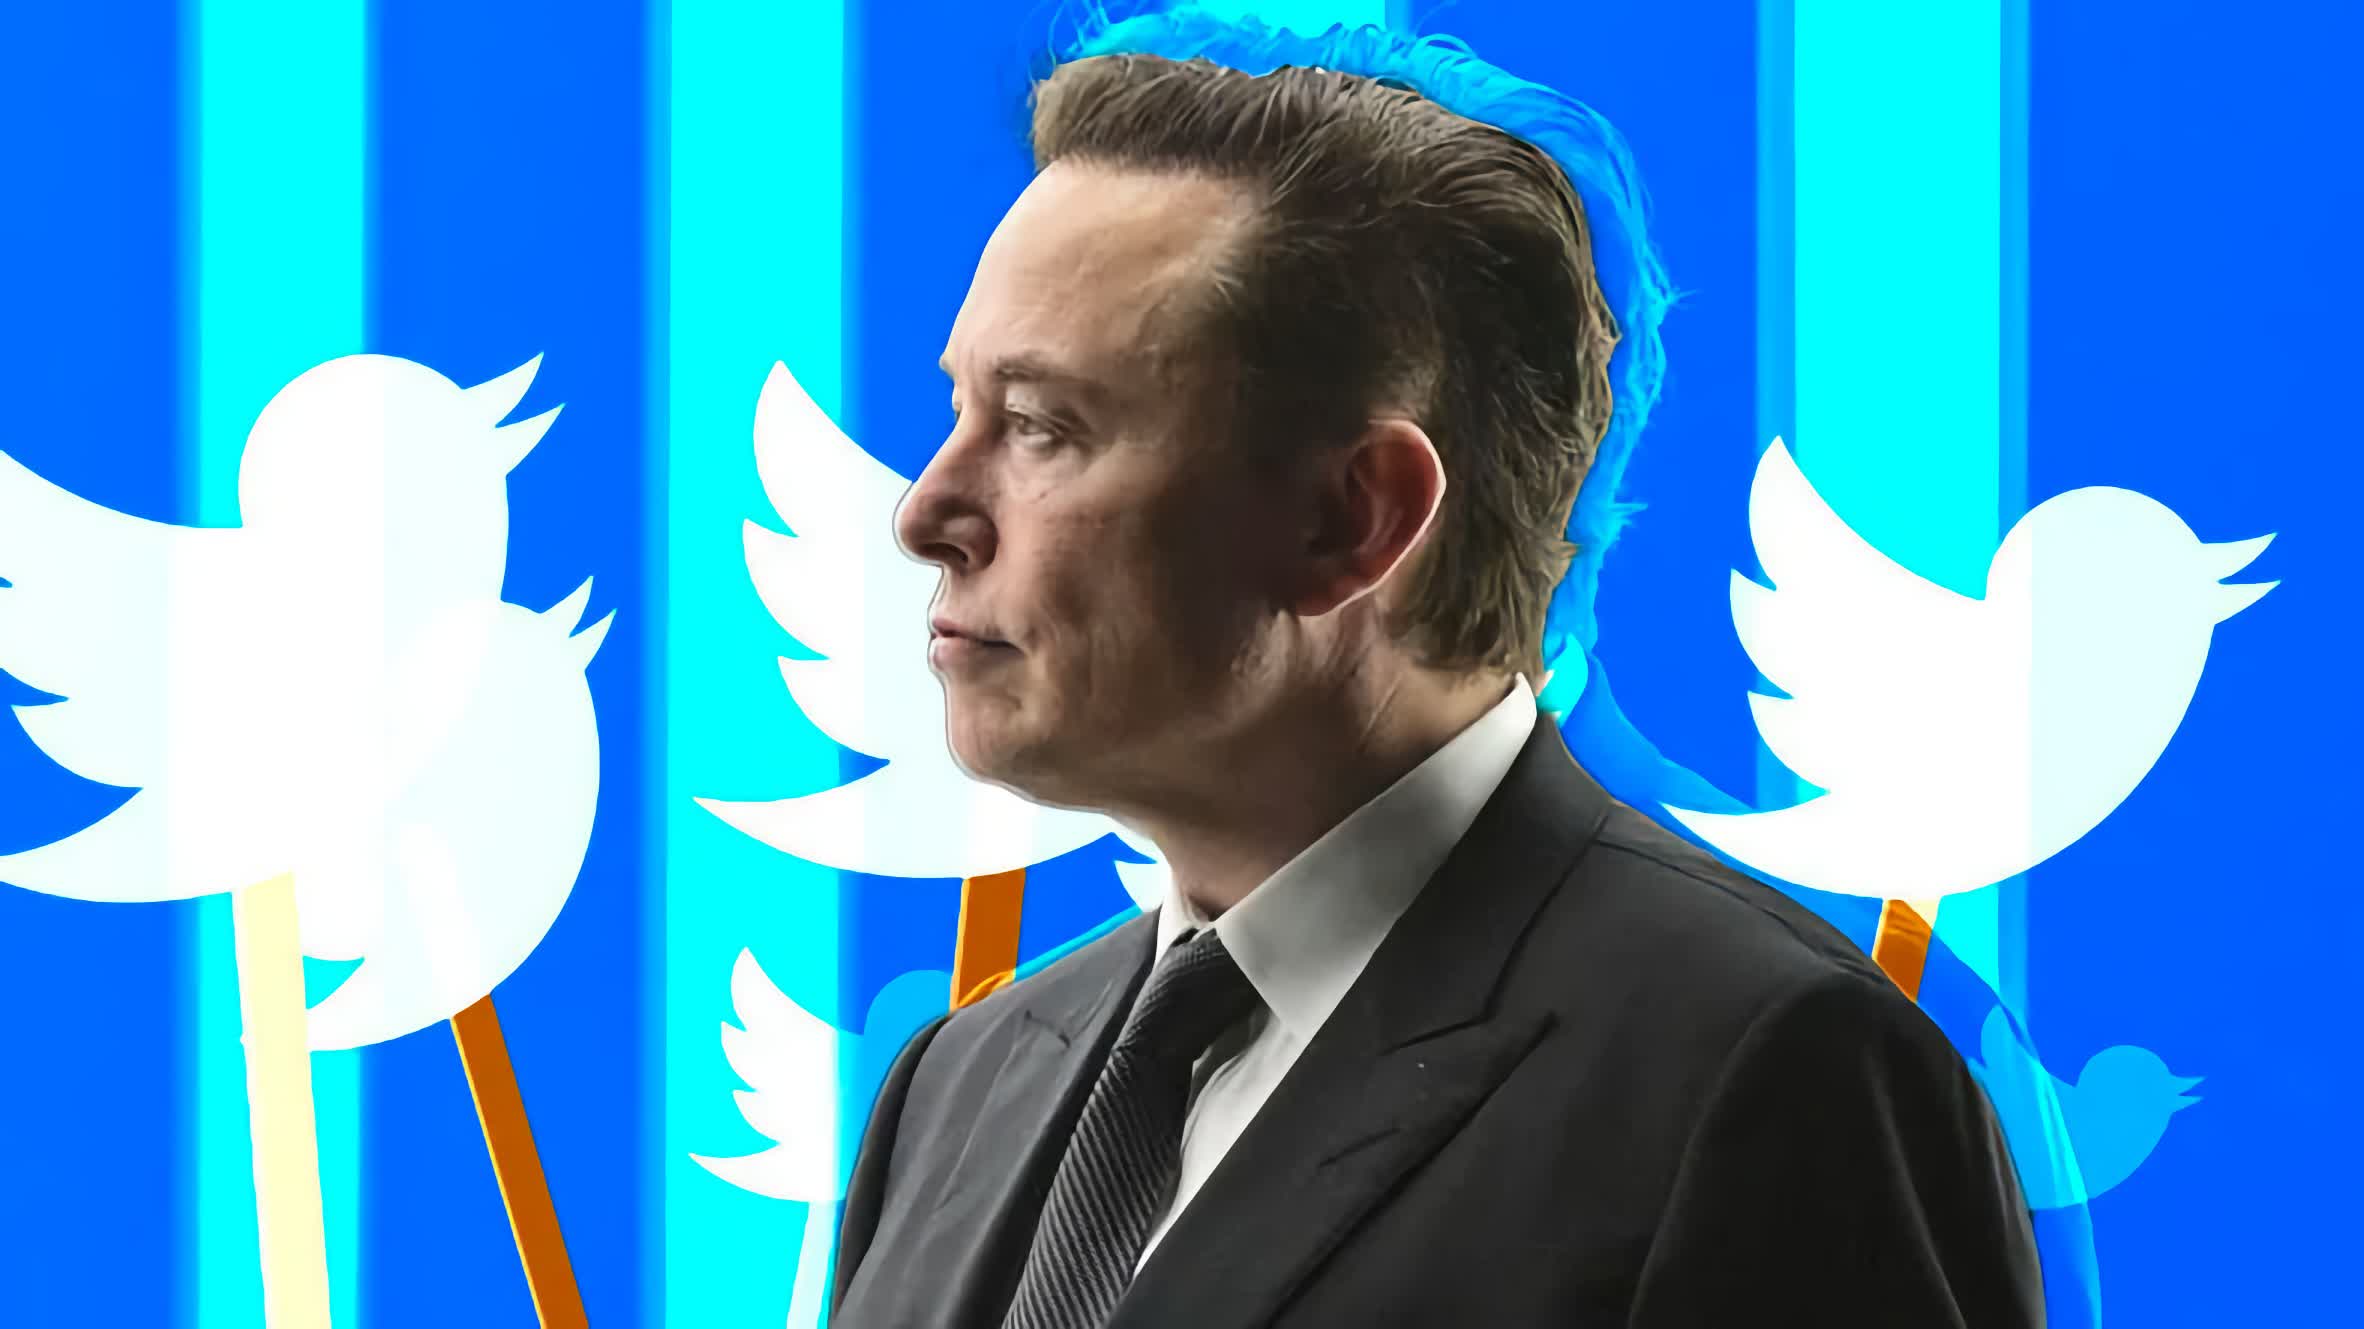 Elon Musk agrees to proceed with Twitter acquisition at original price